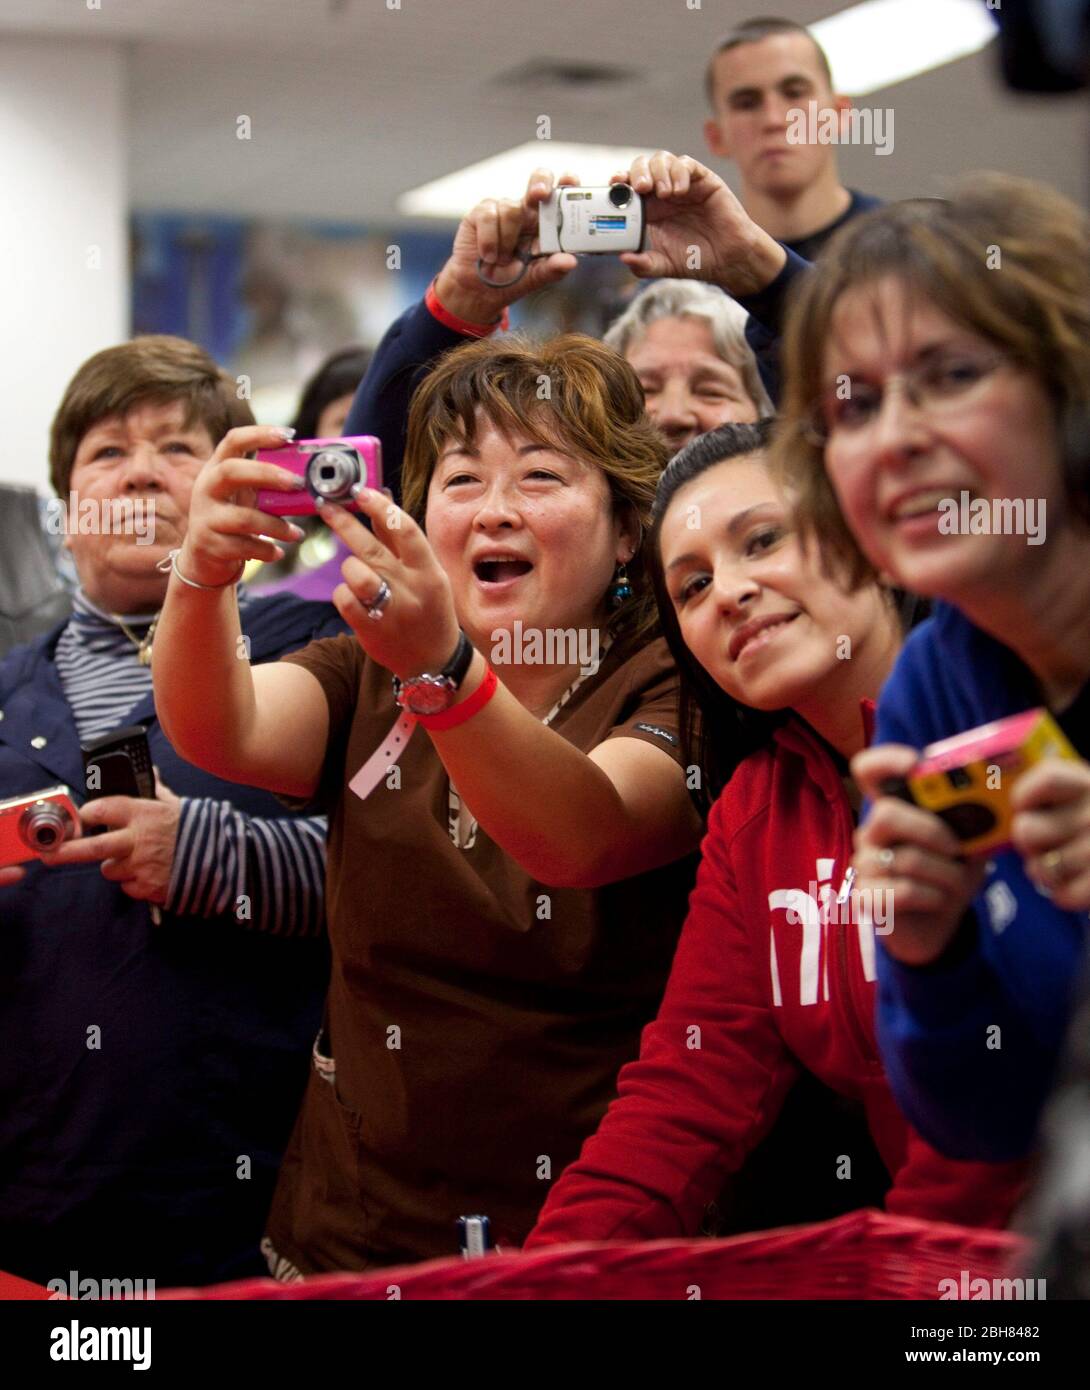 Fort Hood Texas USA, December 5 2009: Fans of former Alaska Governor Sarah Palin (not pictured) take photos of her as she arrives at the post store to sign  copies of her book, 'Going Rogue,' for soldiers at Fort Hood, Texas, a month after gunman Nidal Malik Hasan allegedly killed 13 people in a shooting rampage on the base. Palin is on a multi-city U.S. book tour and testing the waters for a possible 2012 presidential bid. ©Bob Daemmrich Stock Photo